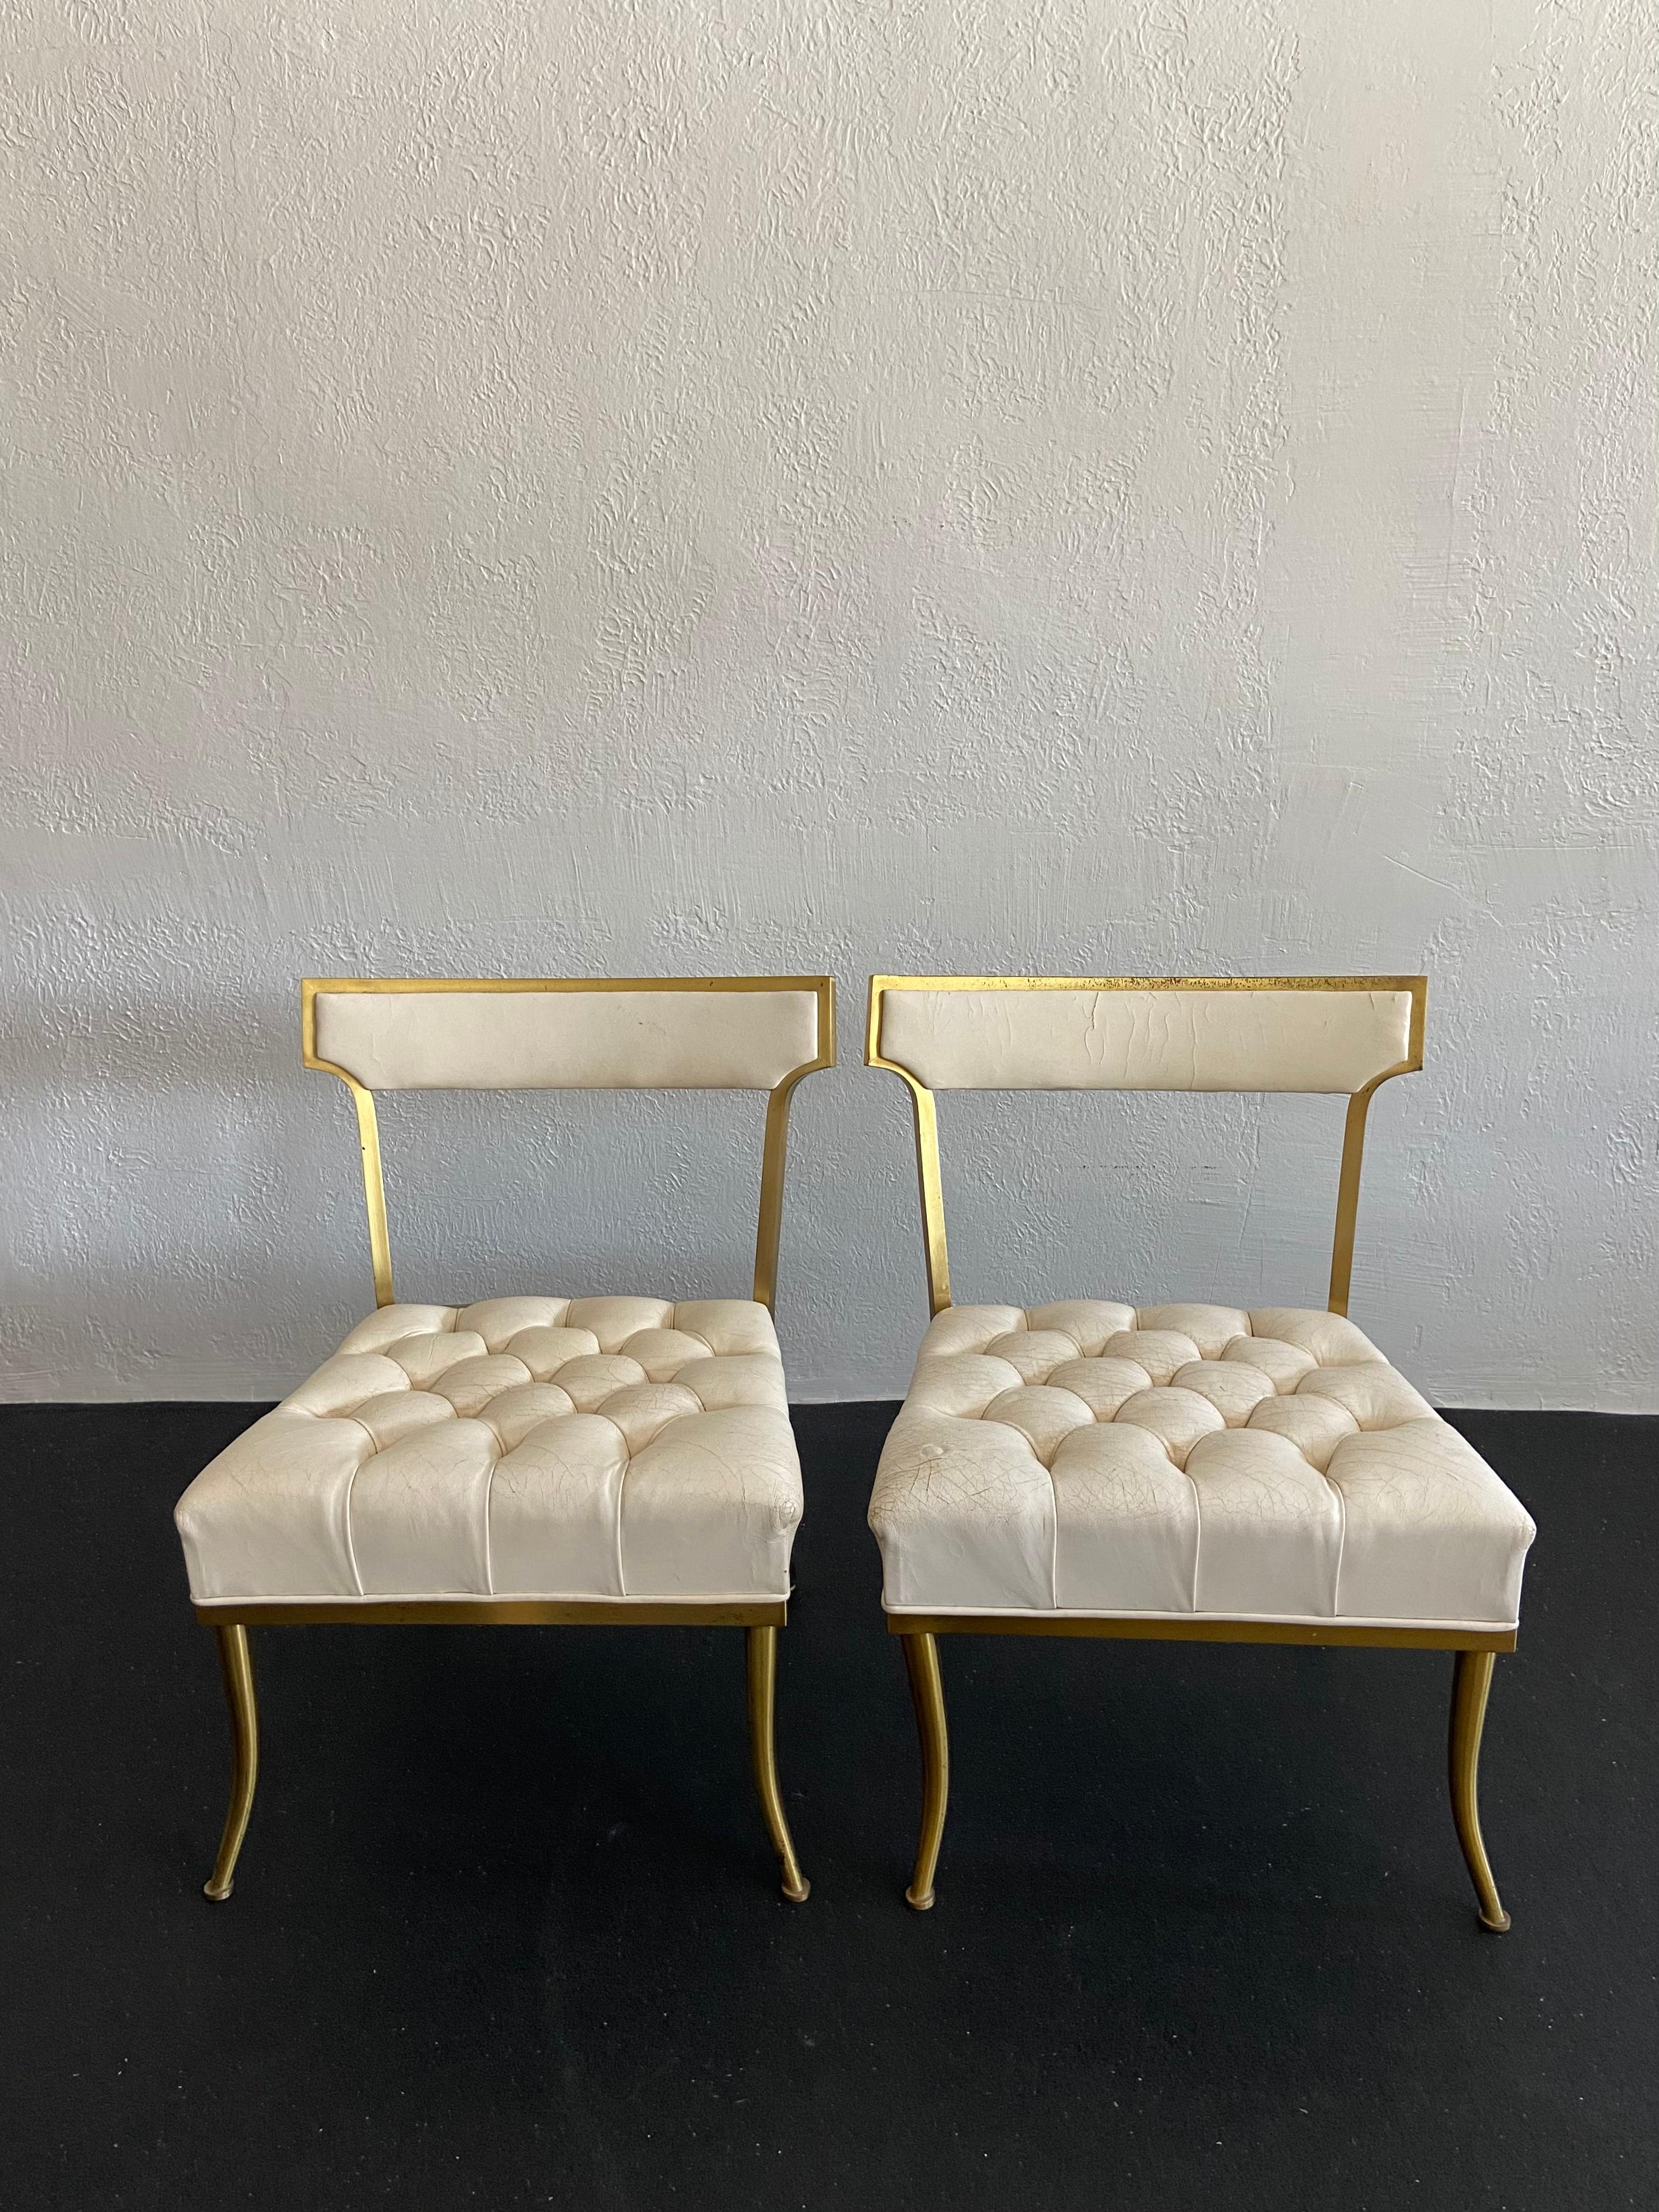 American Billy Haines Attributed Brass and Leather Side Chairs, a Pair For Sale